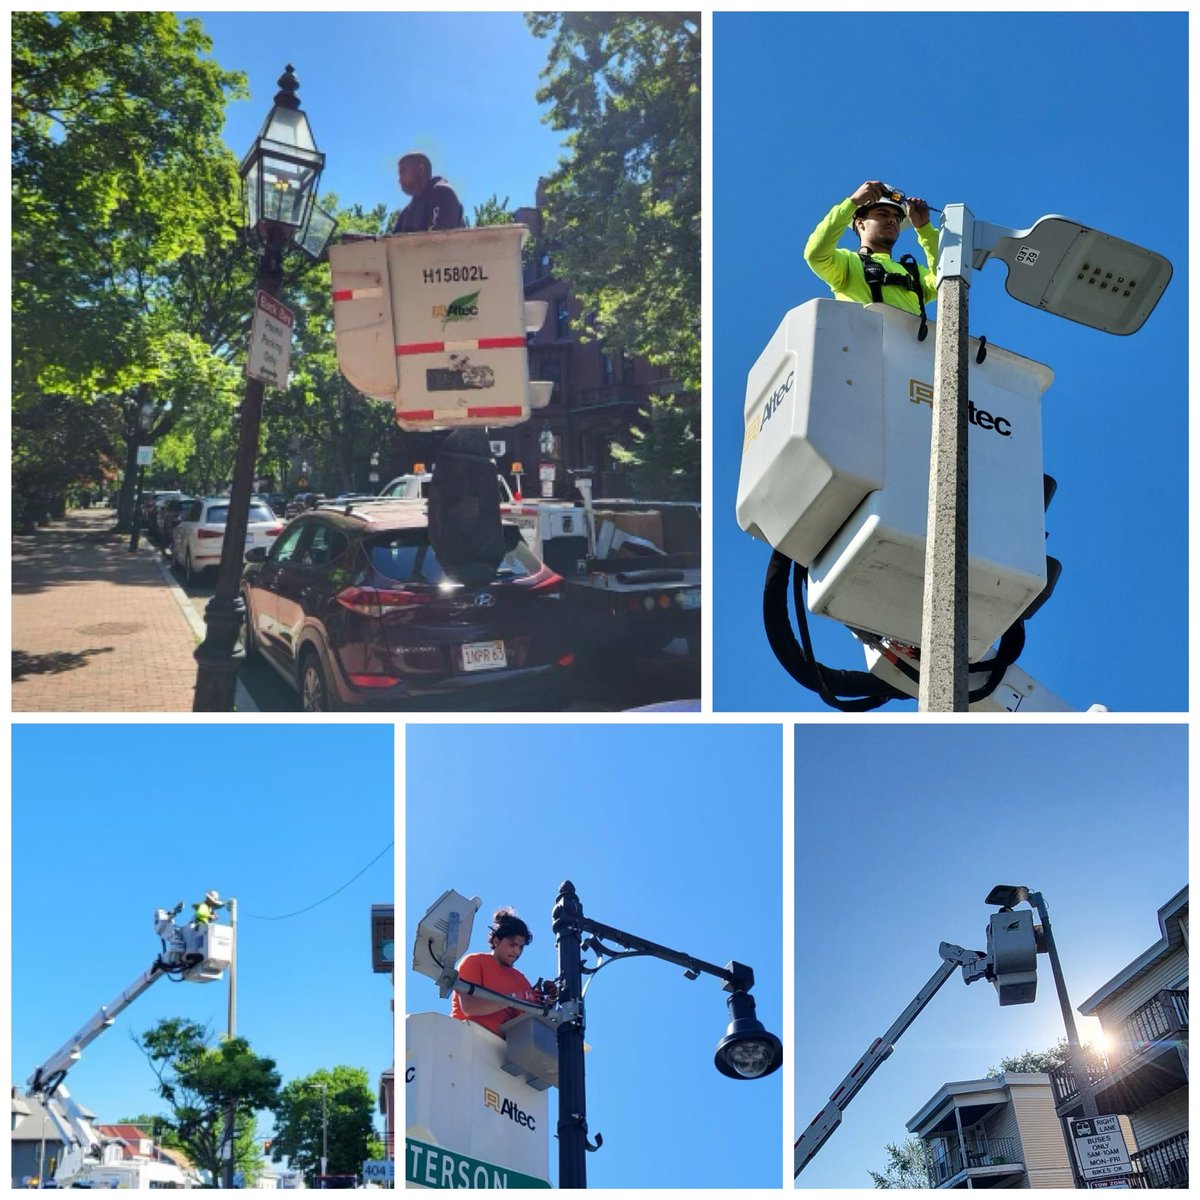 In addition to making repairs to gas lights in #BackBay, our Street Lighting Division is upgrading fixtures in #JamaicaPlain, #Roslindale & #SouthBoston. 💡